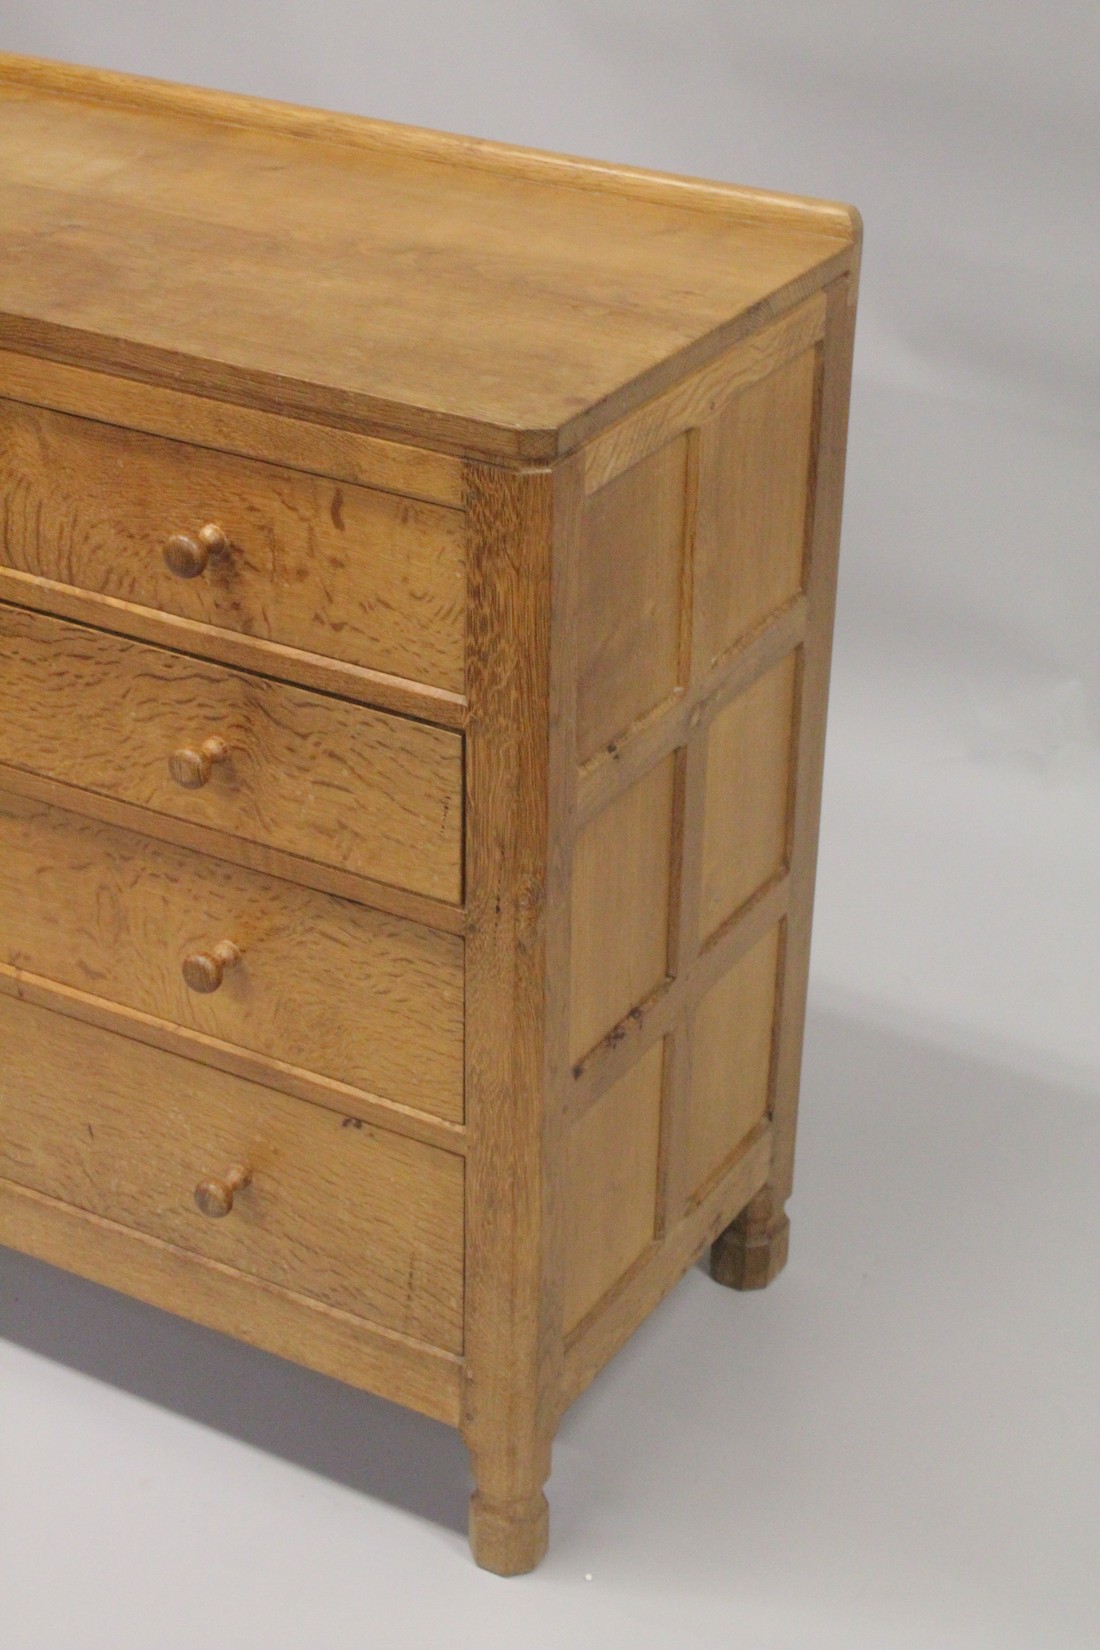 ROBERT "MOUSEMAN" THOMPSON. AN OAK CHEST OF DRAWERS, with adzed rectangular top, panelled ends, - Image 4 of 5